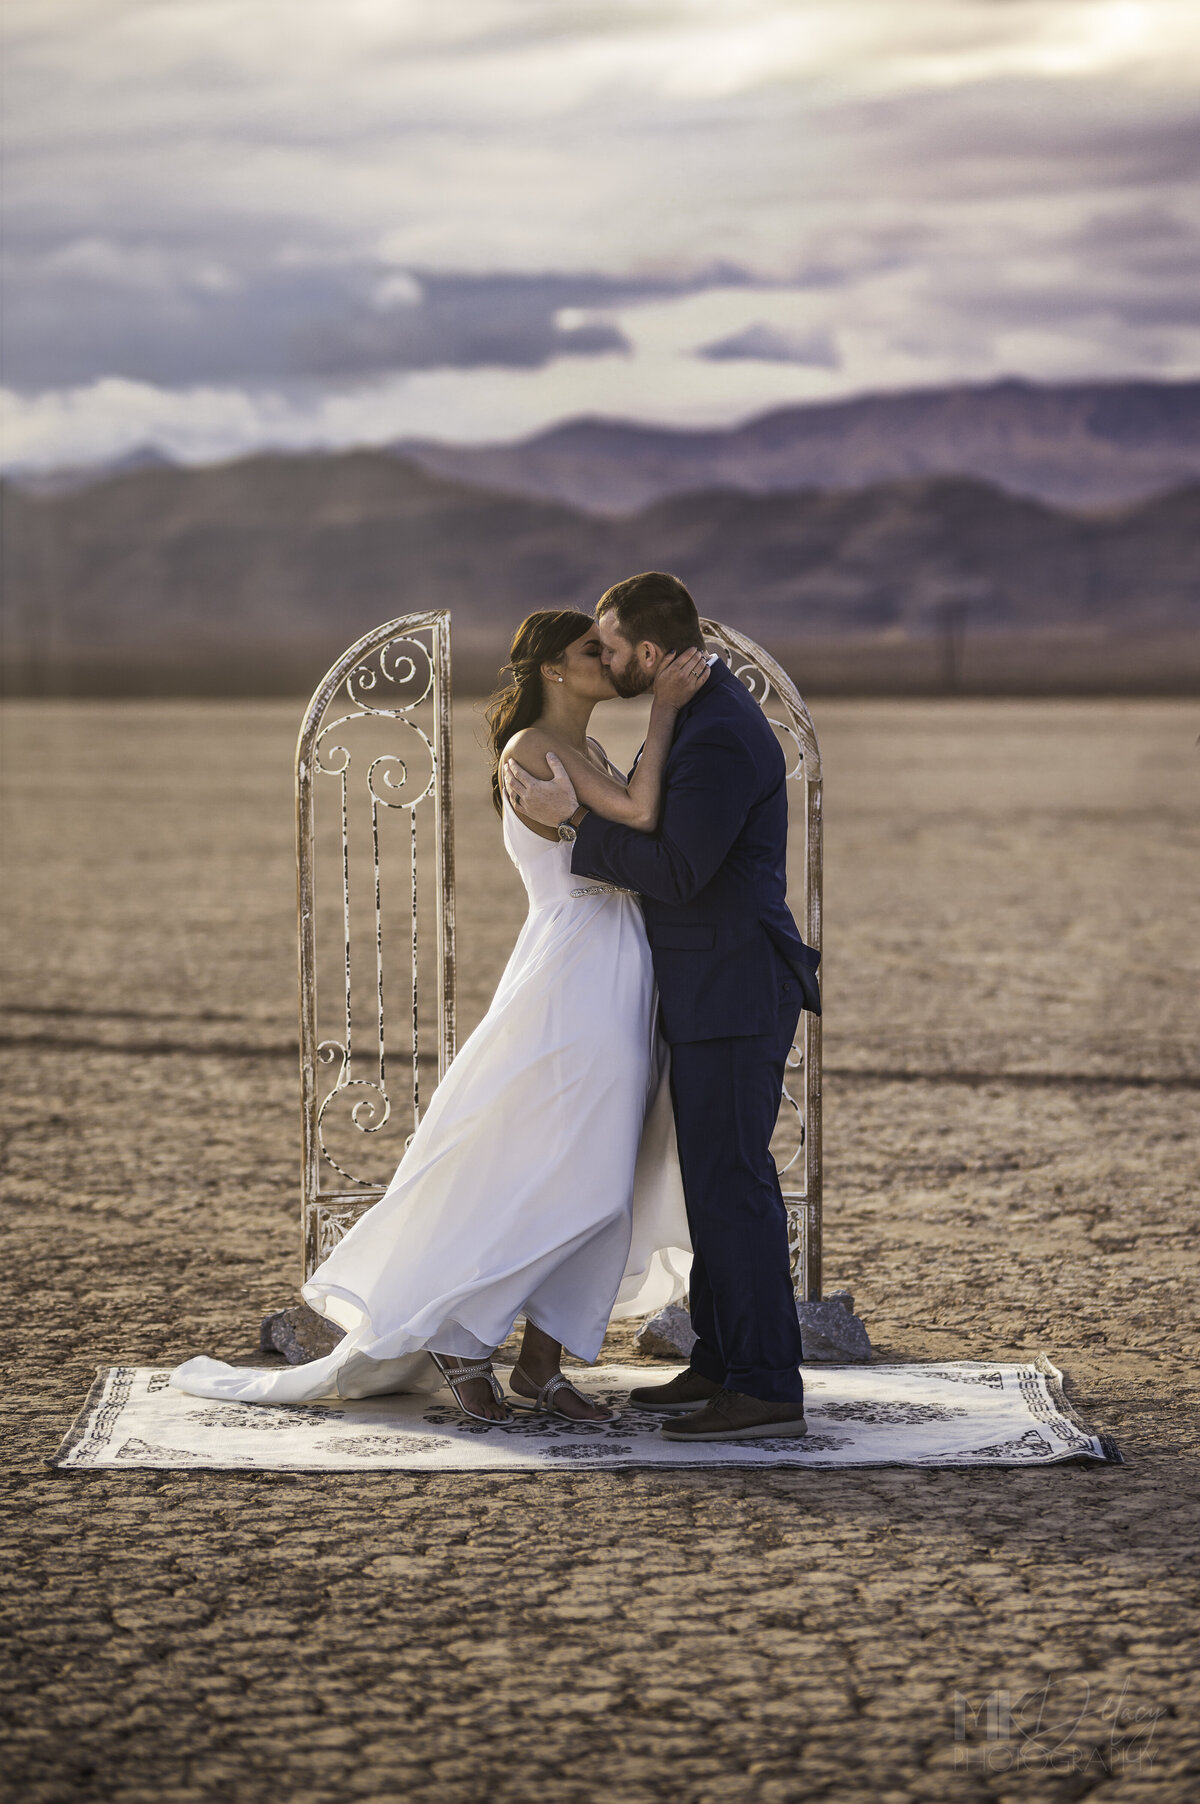 Bride and groom say I do First Kiss as man and wife purple mountains Dry lake Bed elopement Blue Suit on Groom  flowers by michelle  bride in cream color wedding dress with deep  plunging  neckline mountain skyline  sunset las vegas wedding photographers mk delacy photography